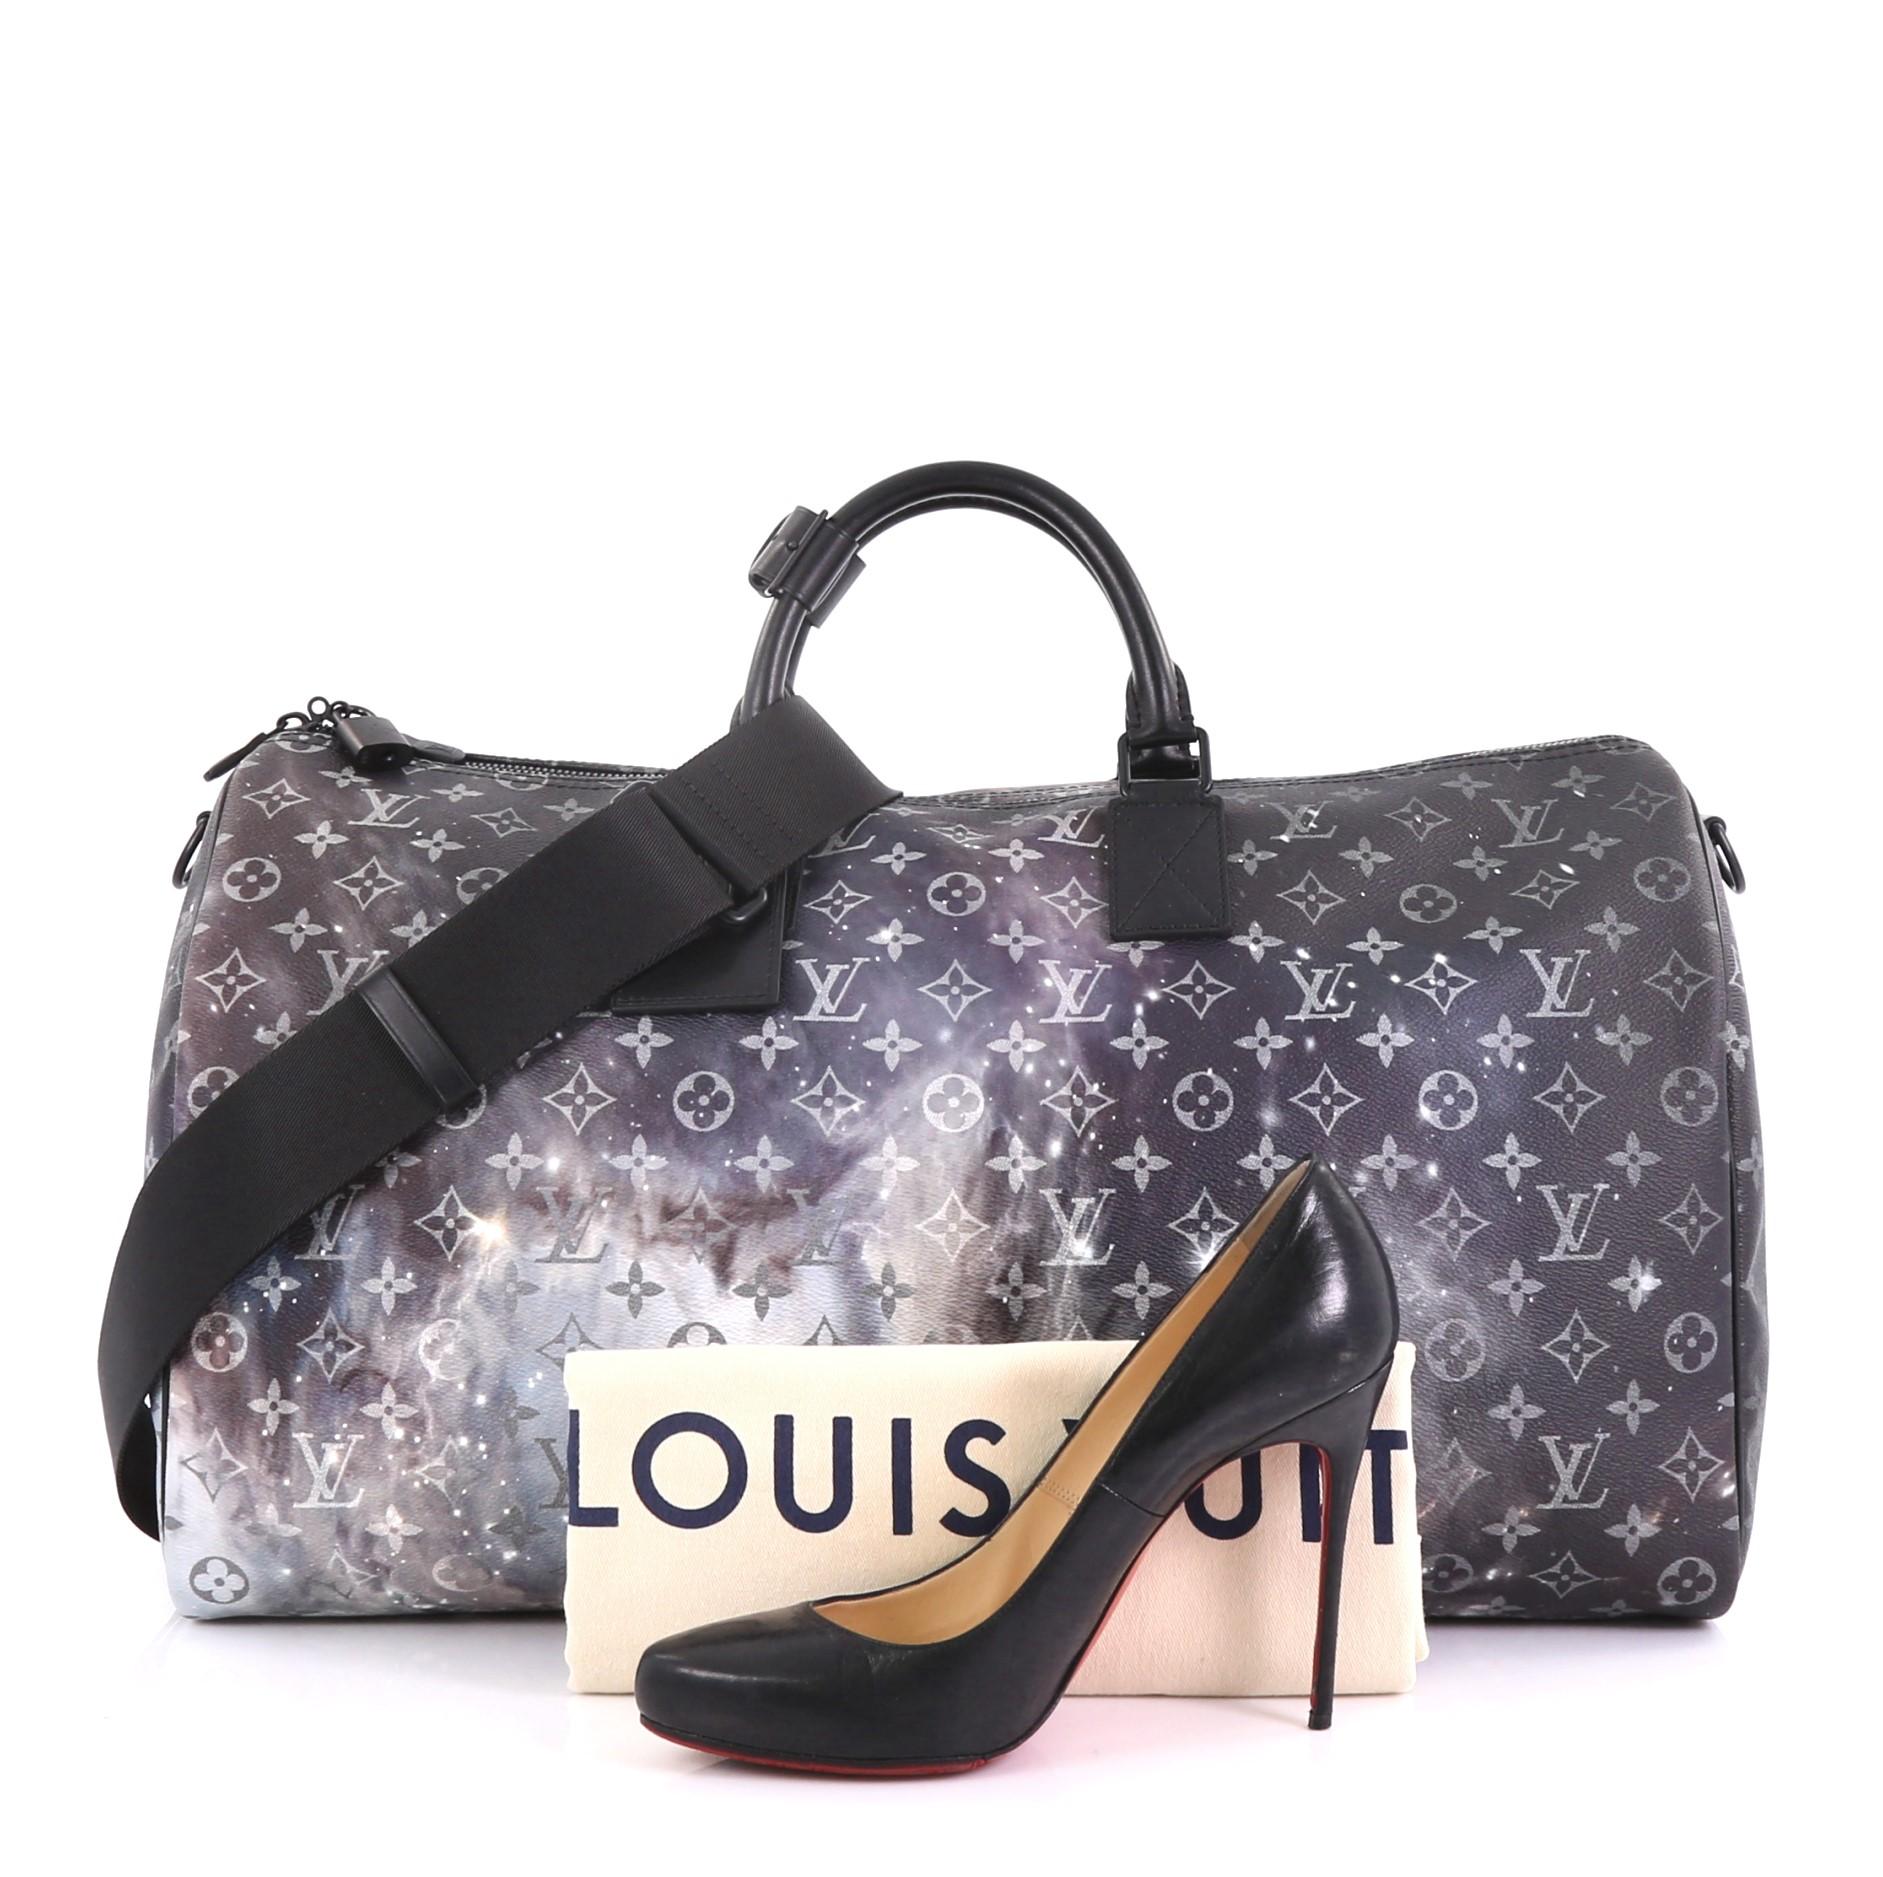 This Louis Vuitton Keepall Bandouliere Bag Limited Edition Monogram Galaxy Canvas 50, crafted in monogram Galaxy coated canvas, features dual rolled leather handles, leather trim, and matte black-tone hardware. Its zip closure opens to a black